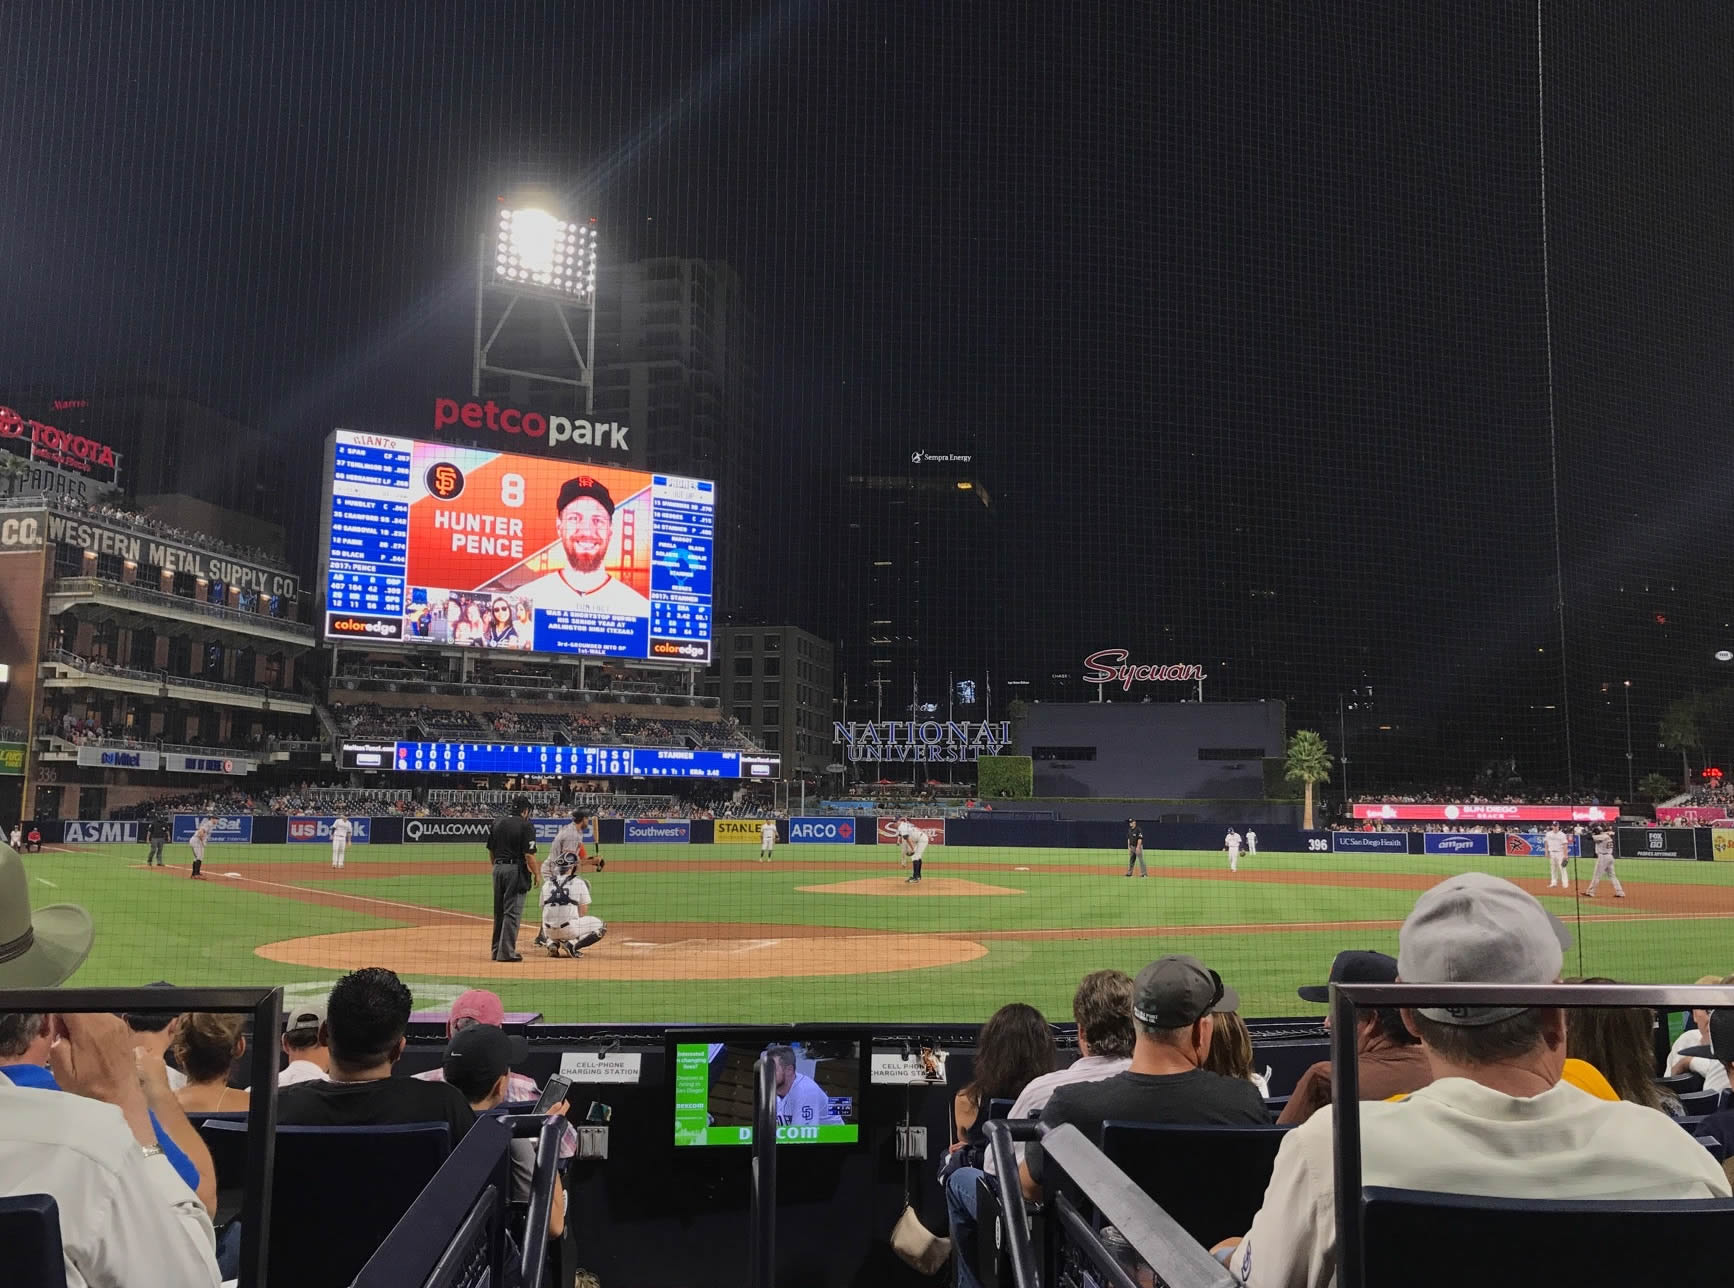 Home Plate Club at PETCO Park 